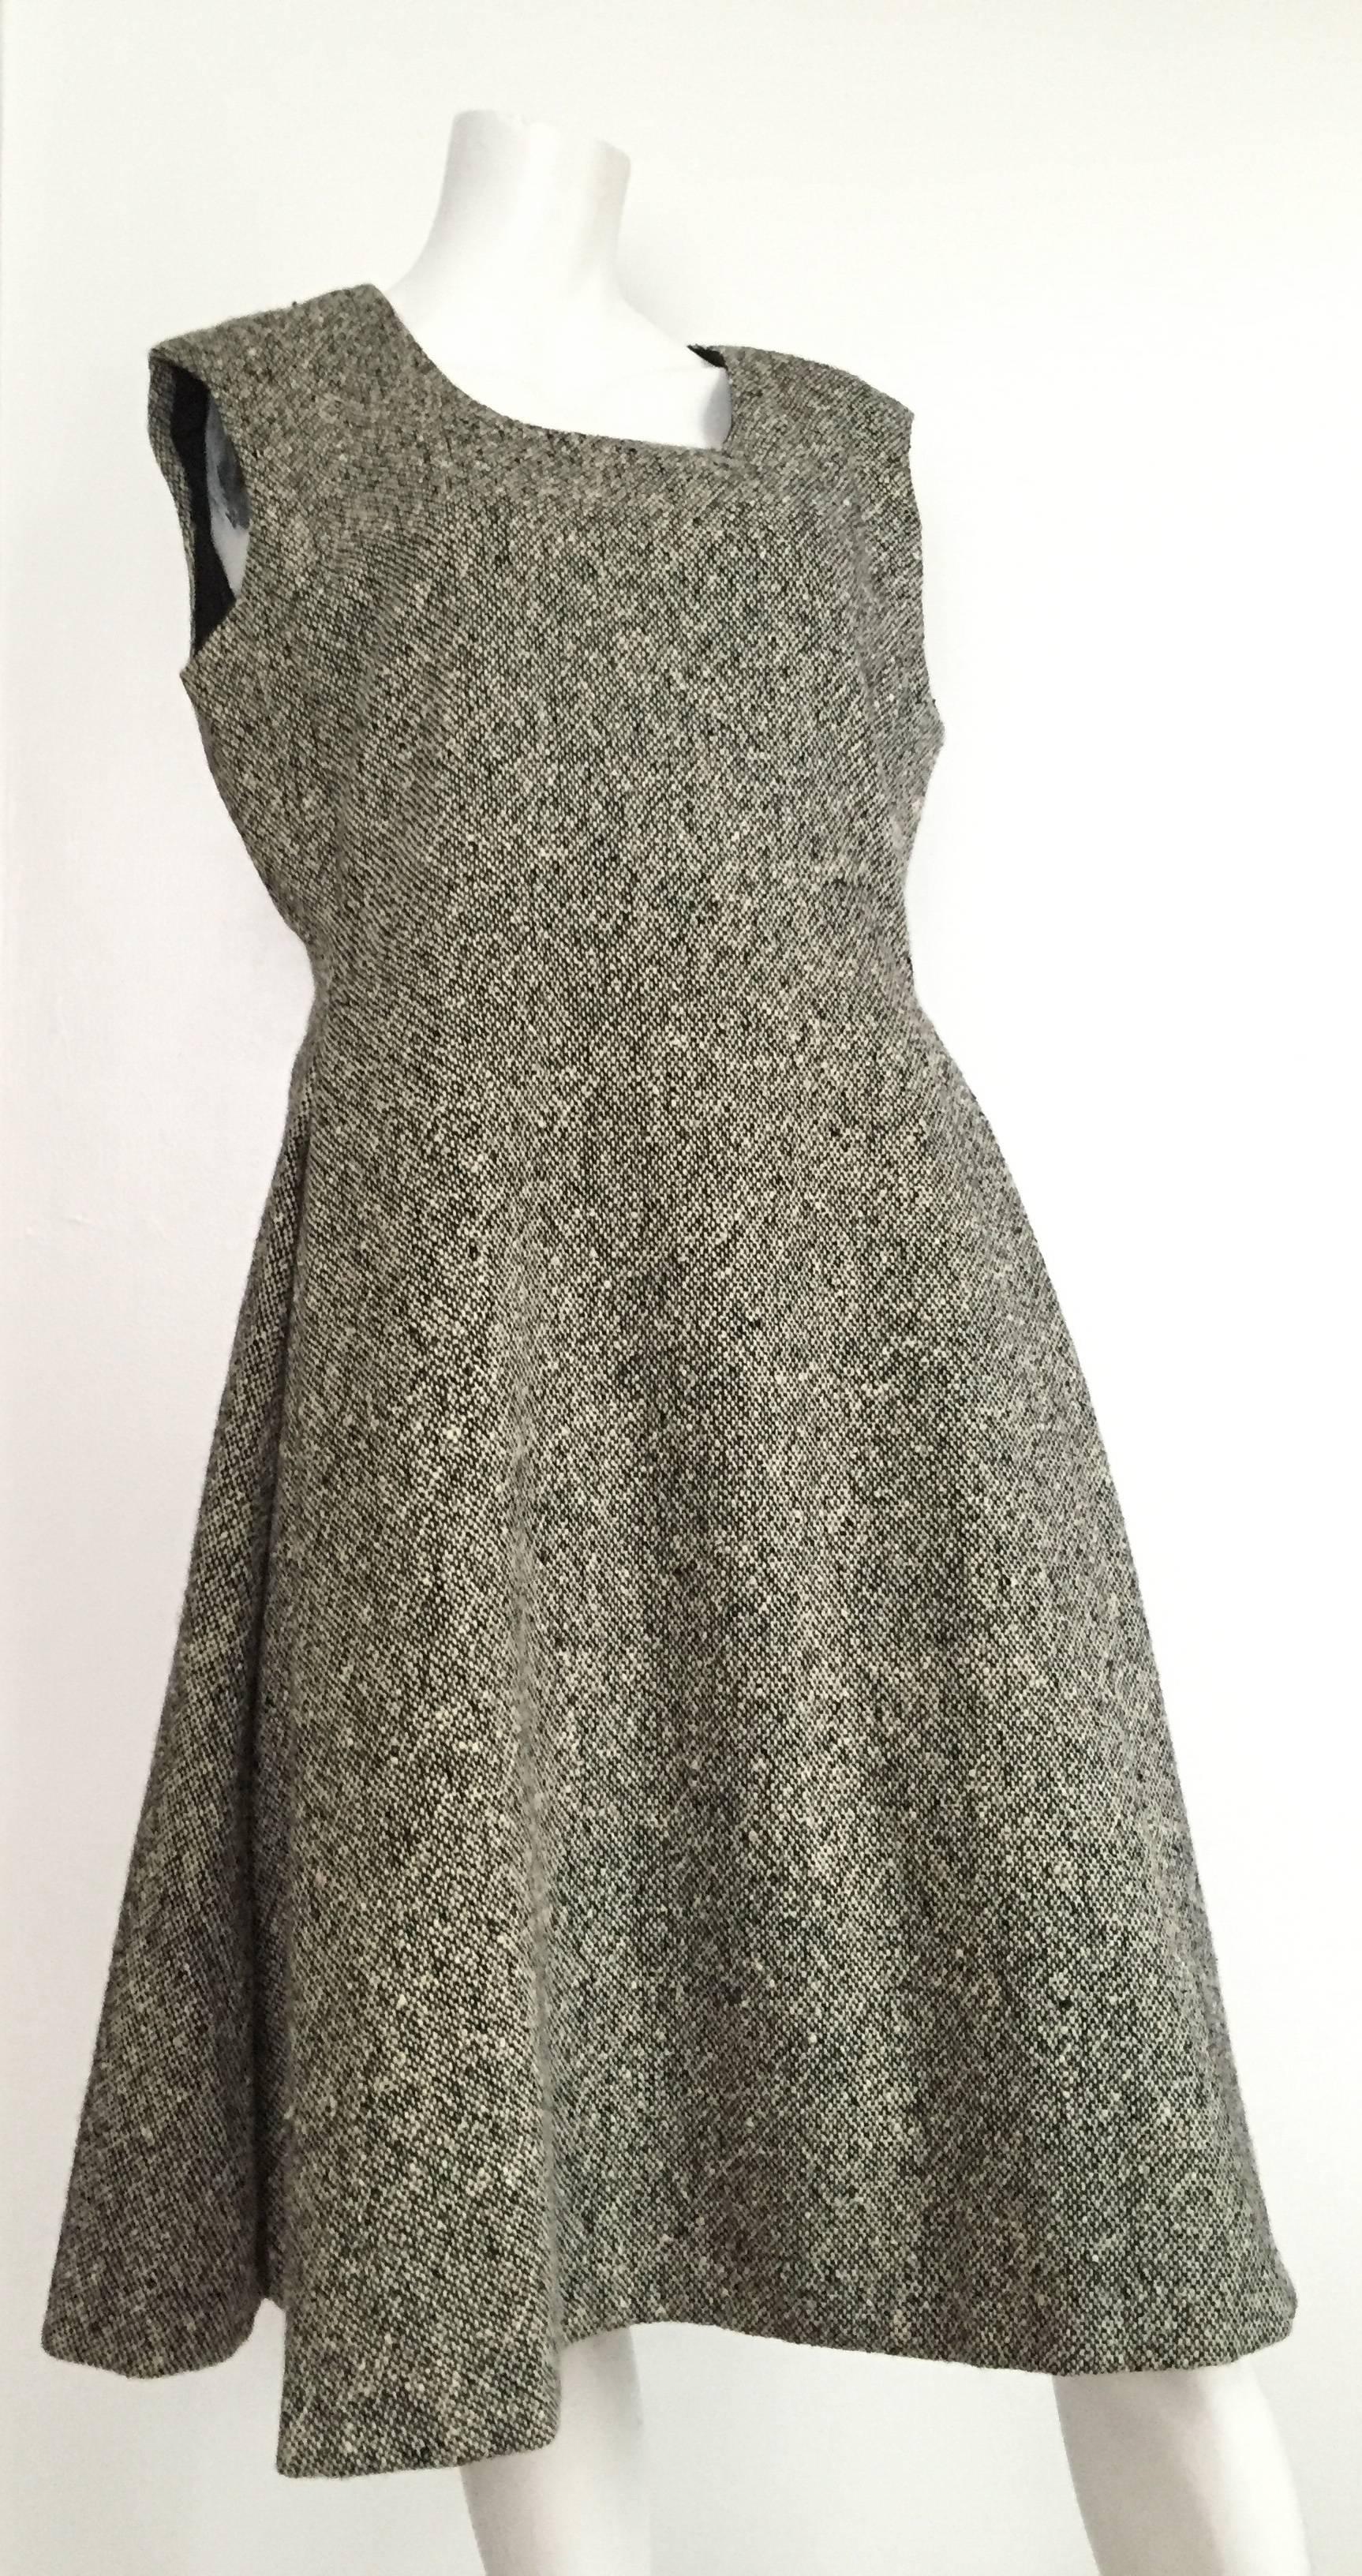 Gustave Tassell for Rich's Department store in Atlanta 1965 nubby wool sleeveless dress with cropped jacket is a size 12 / 14 but please see and use the measurements below so you may properly measure your body to make certain this will fit. Having